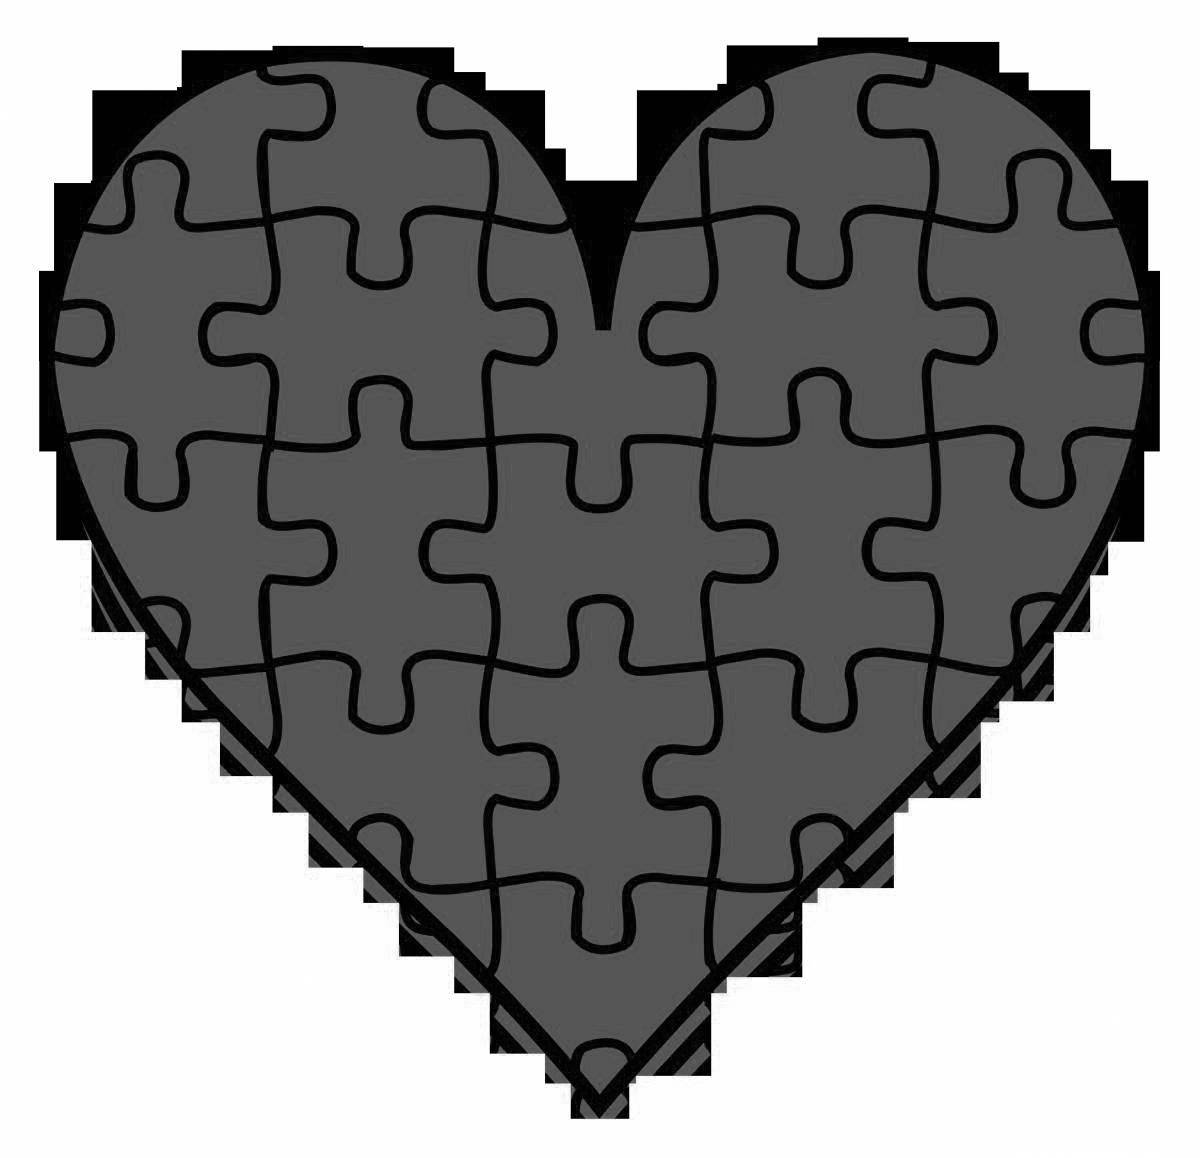 Glitter heart coloring page